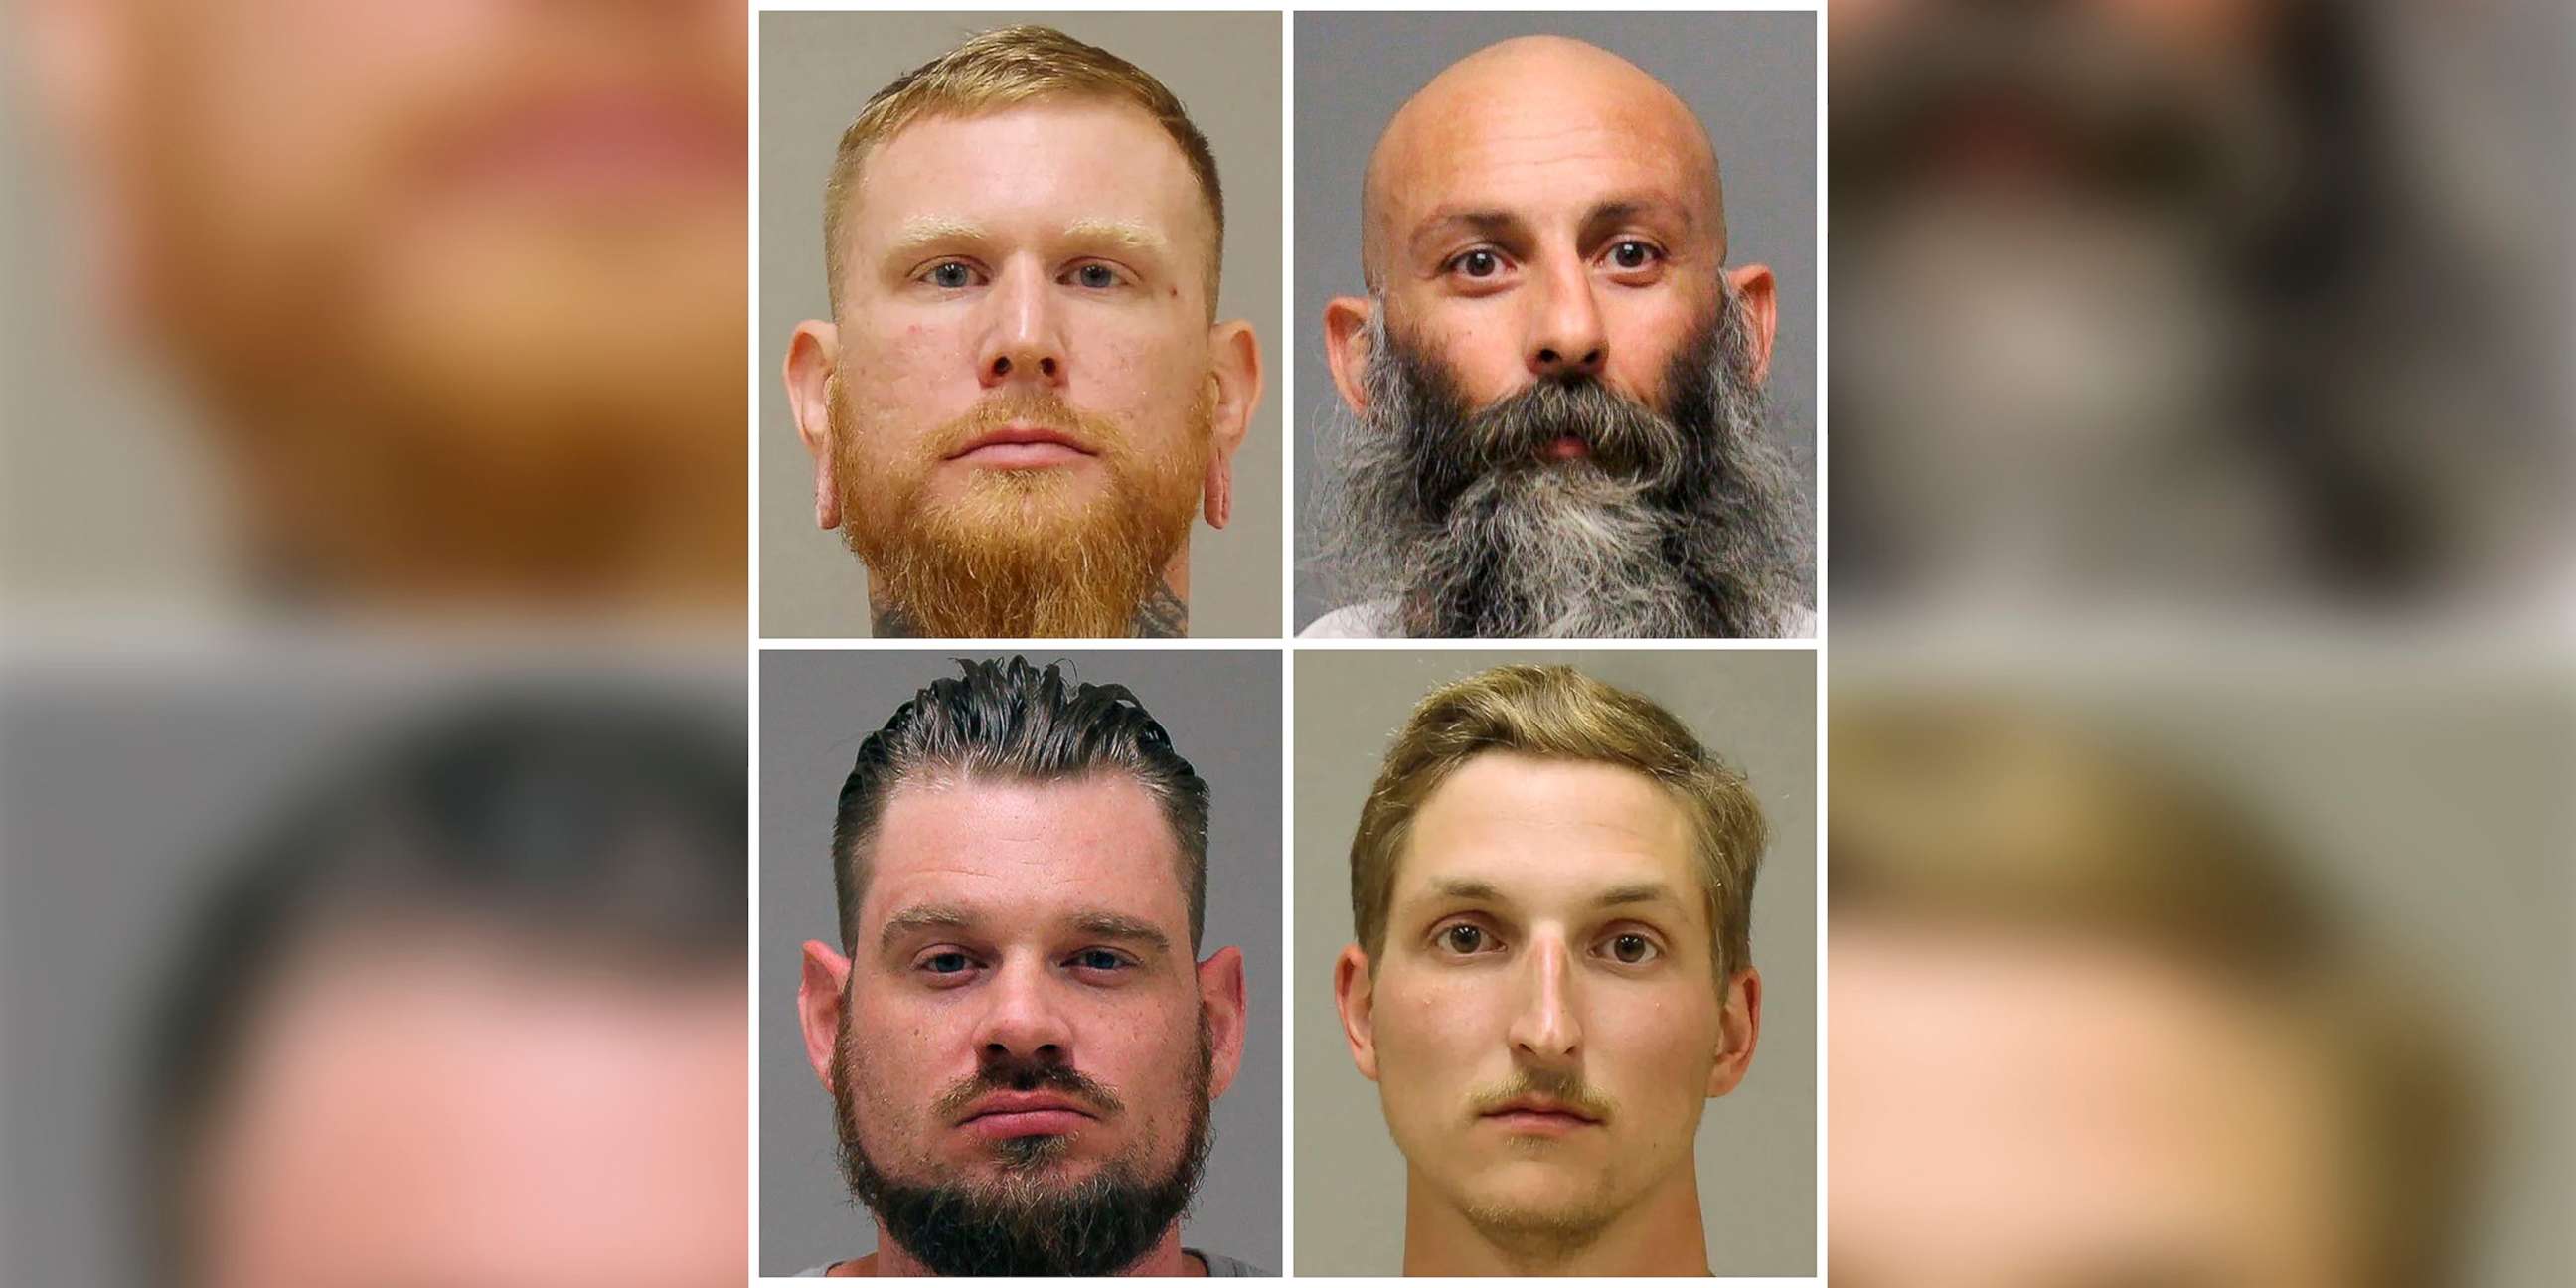 PHOTO: This combination of photos provided by the Kent County Sheriff and the Delaware Department of Justice shows, top row from left, Brandon Caserta and Barry Croft; and bottom row from left, Adam Dean Fox and Daniel Harris.